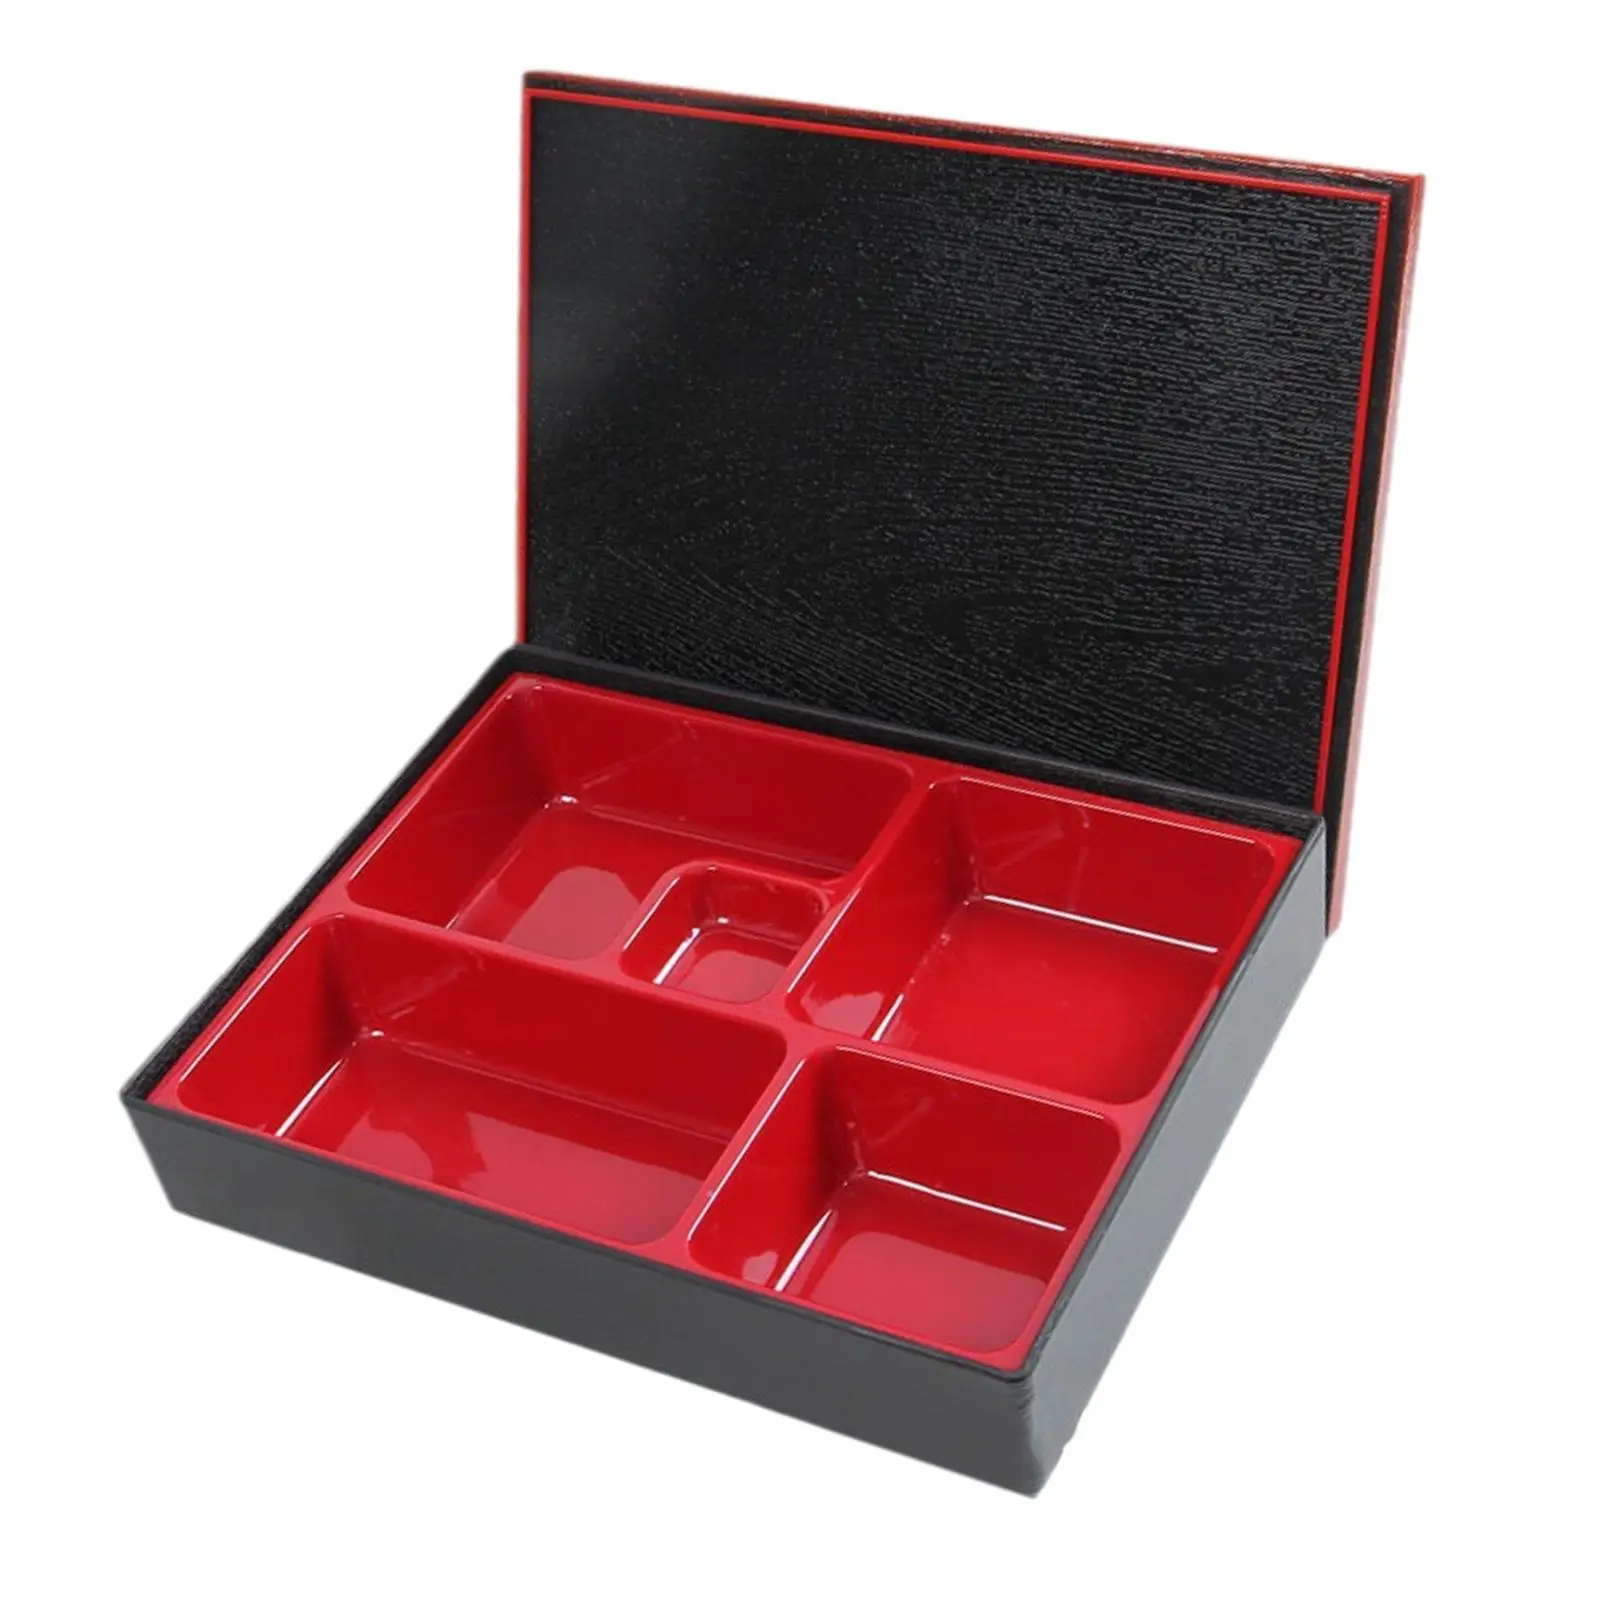 Japanese Bento Box with Lid Lunch Box for Sushi, Rice, Sauce Office Business